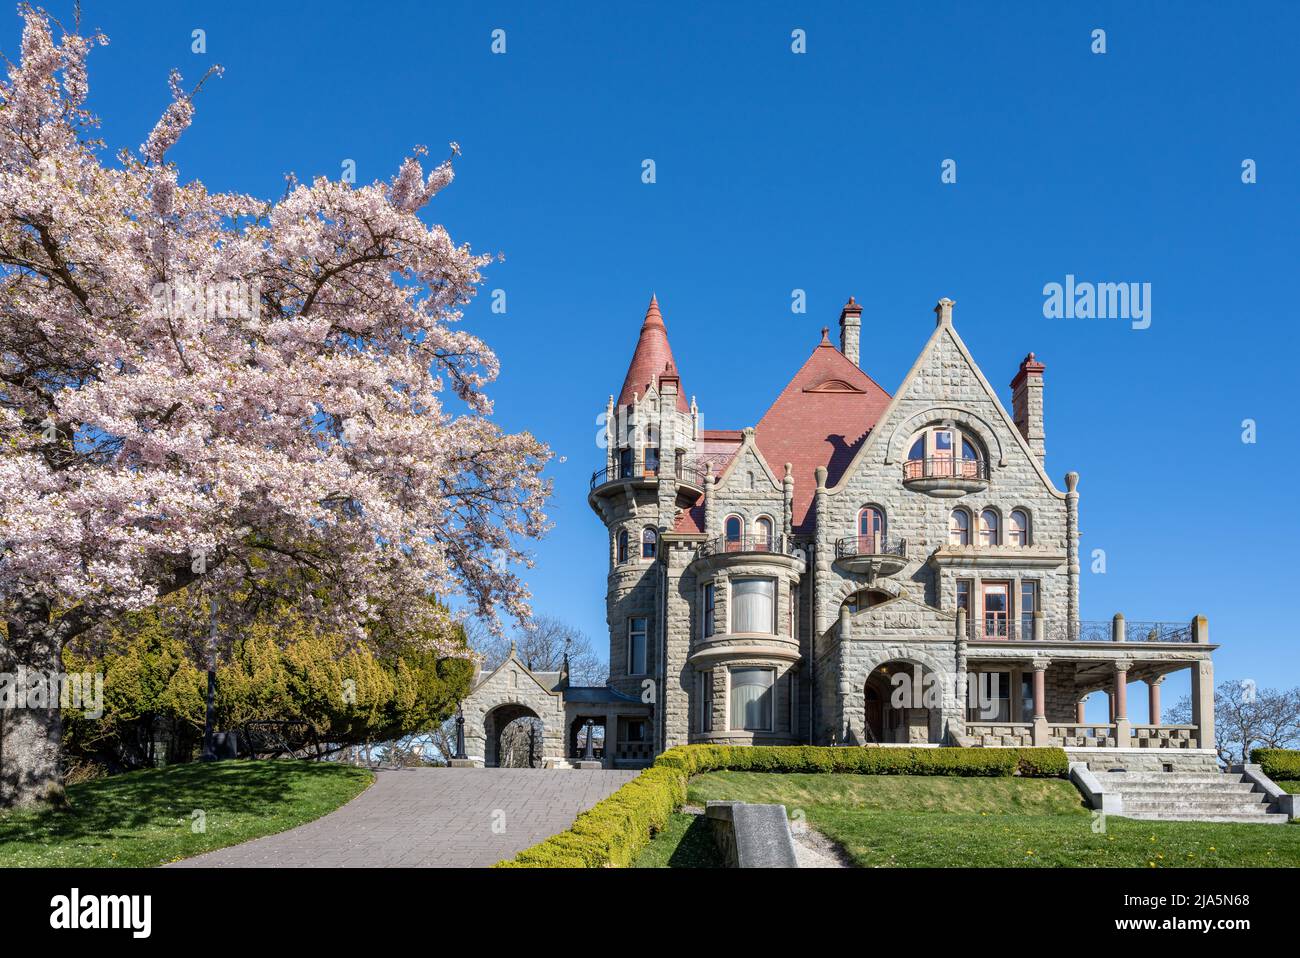 Craigdarroch Castle exterior with full bloom cherry blossom during springtime season. Victoria, BC, Canada. Stock Photo